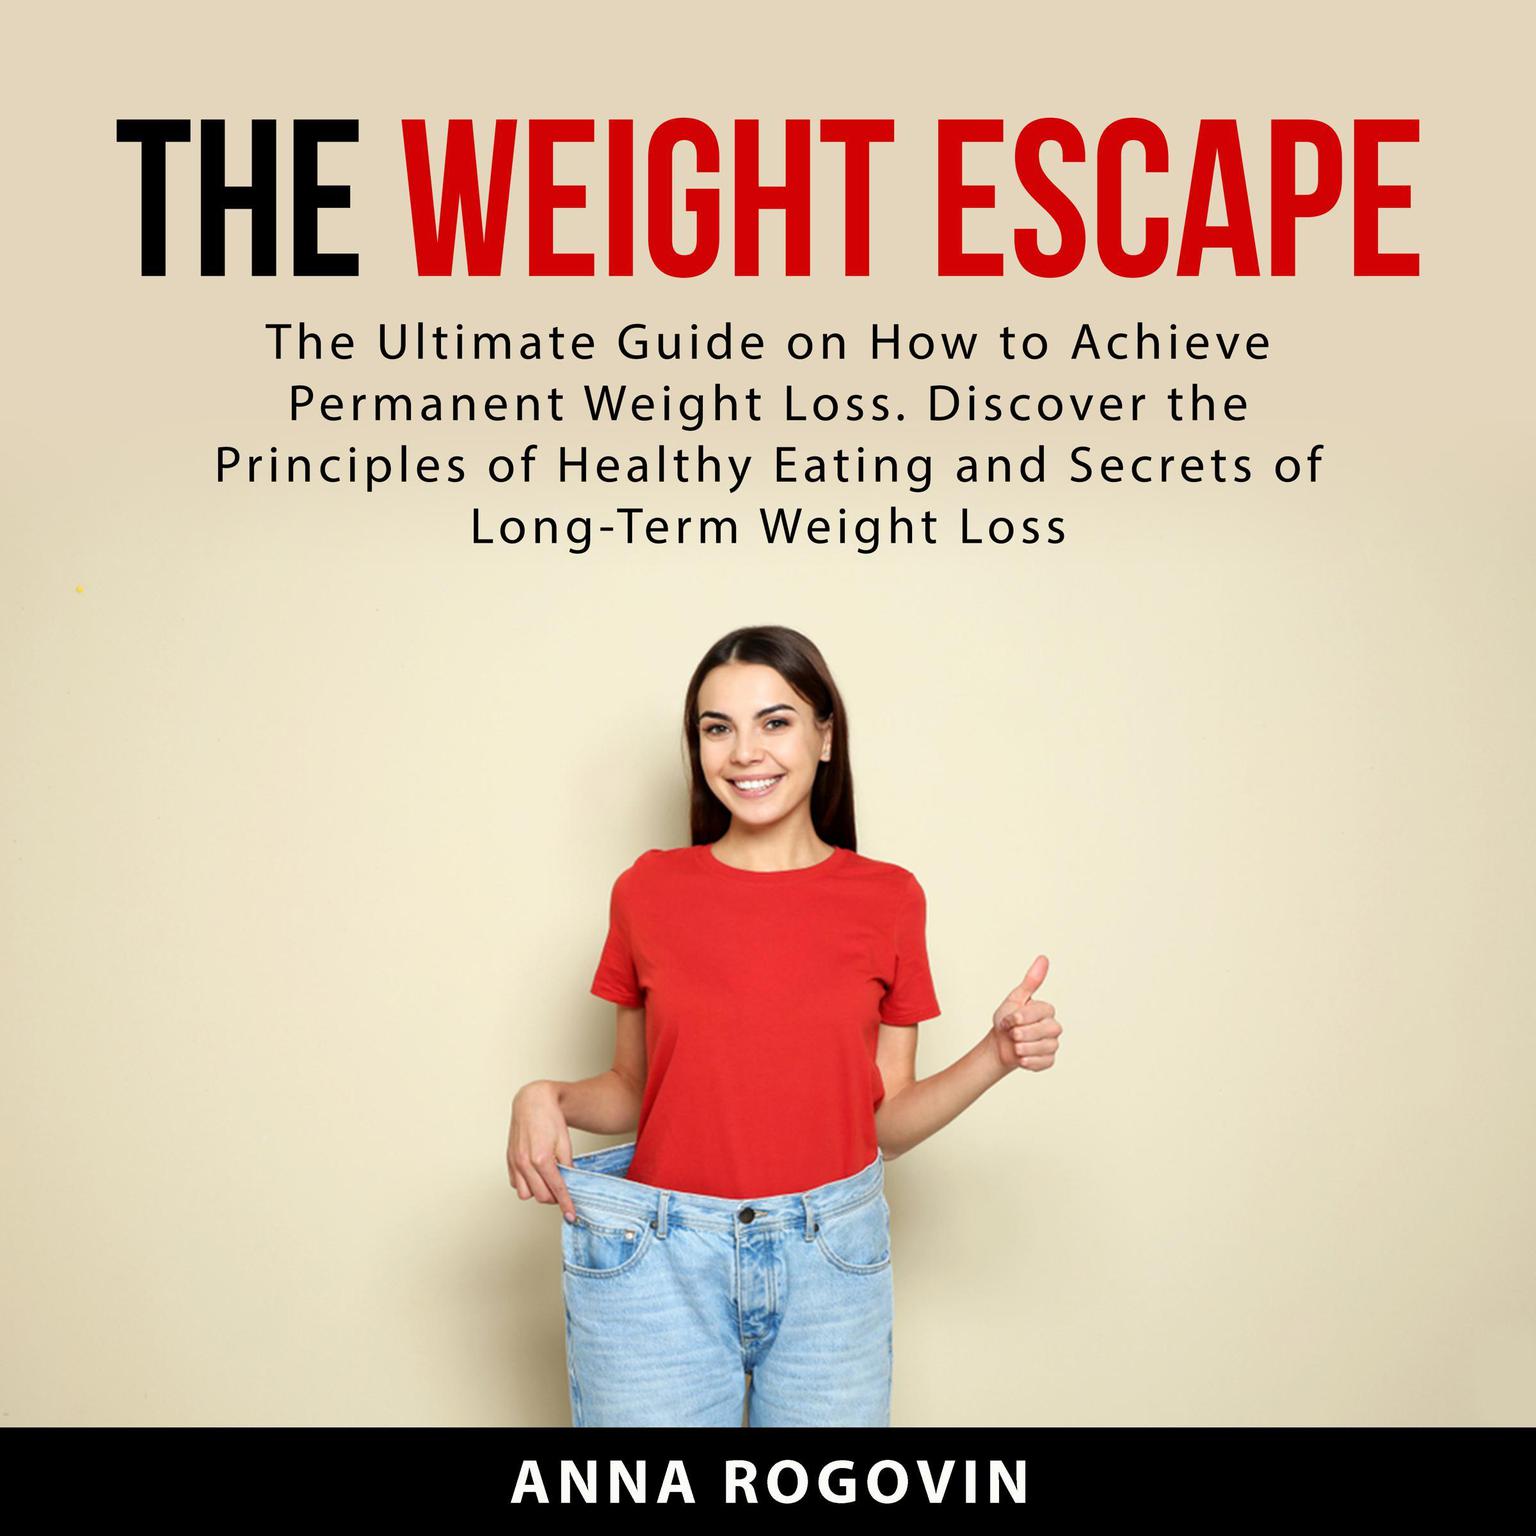 The Weight Escape: The Ultimate Guide on How to Achieve Permanent Weight Loss. Discover the Principles of Healthy Eating and Secrets of Long Term Weight Loss Audiobook, by Anna Rogovin